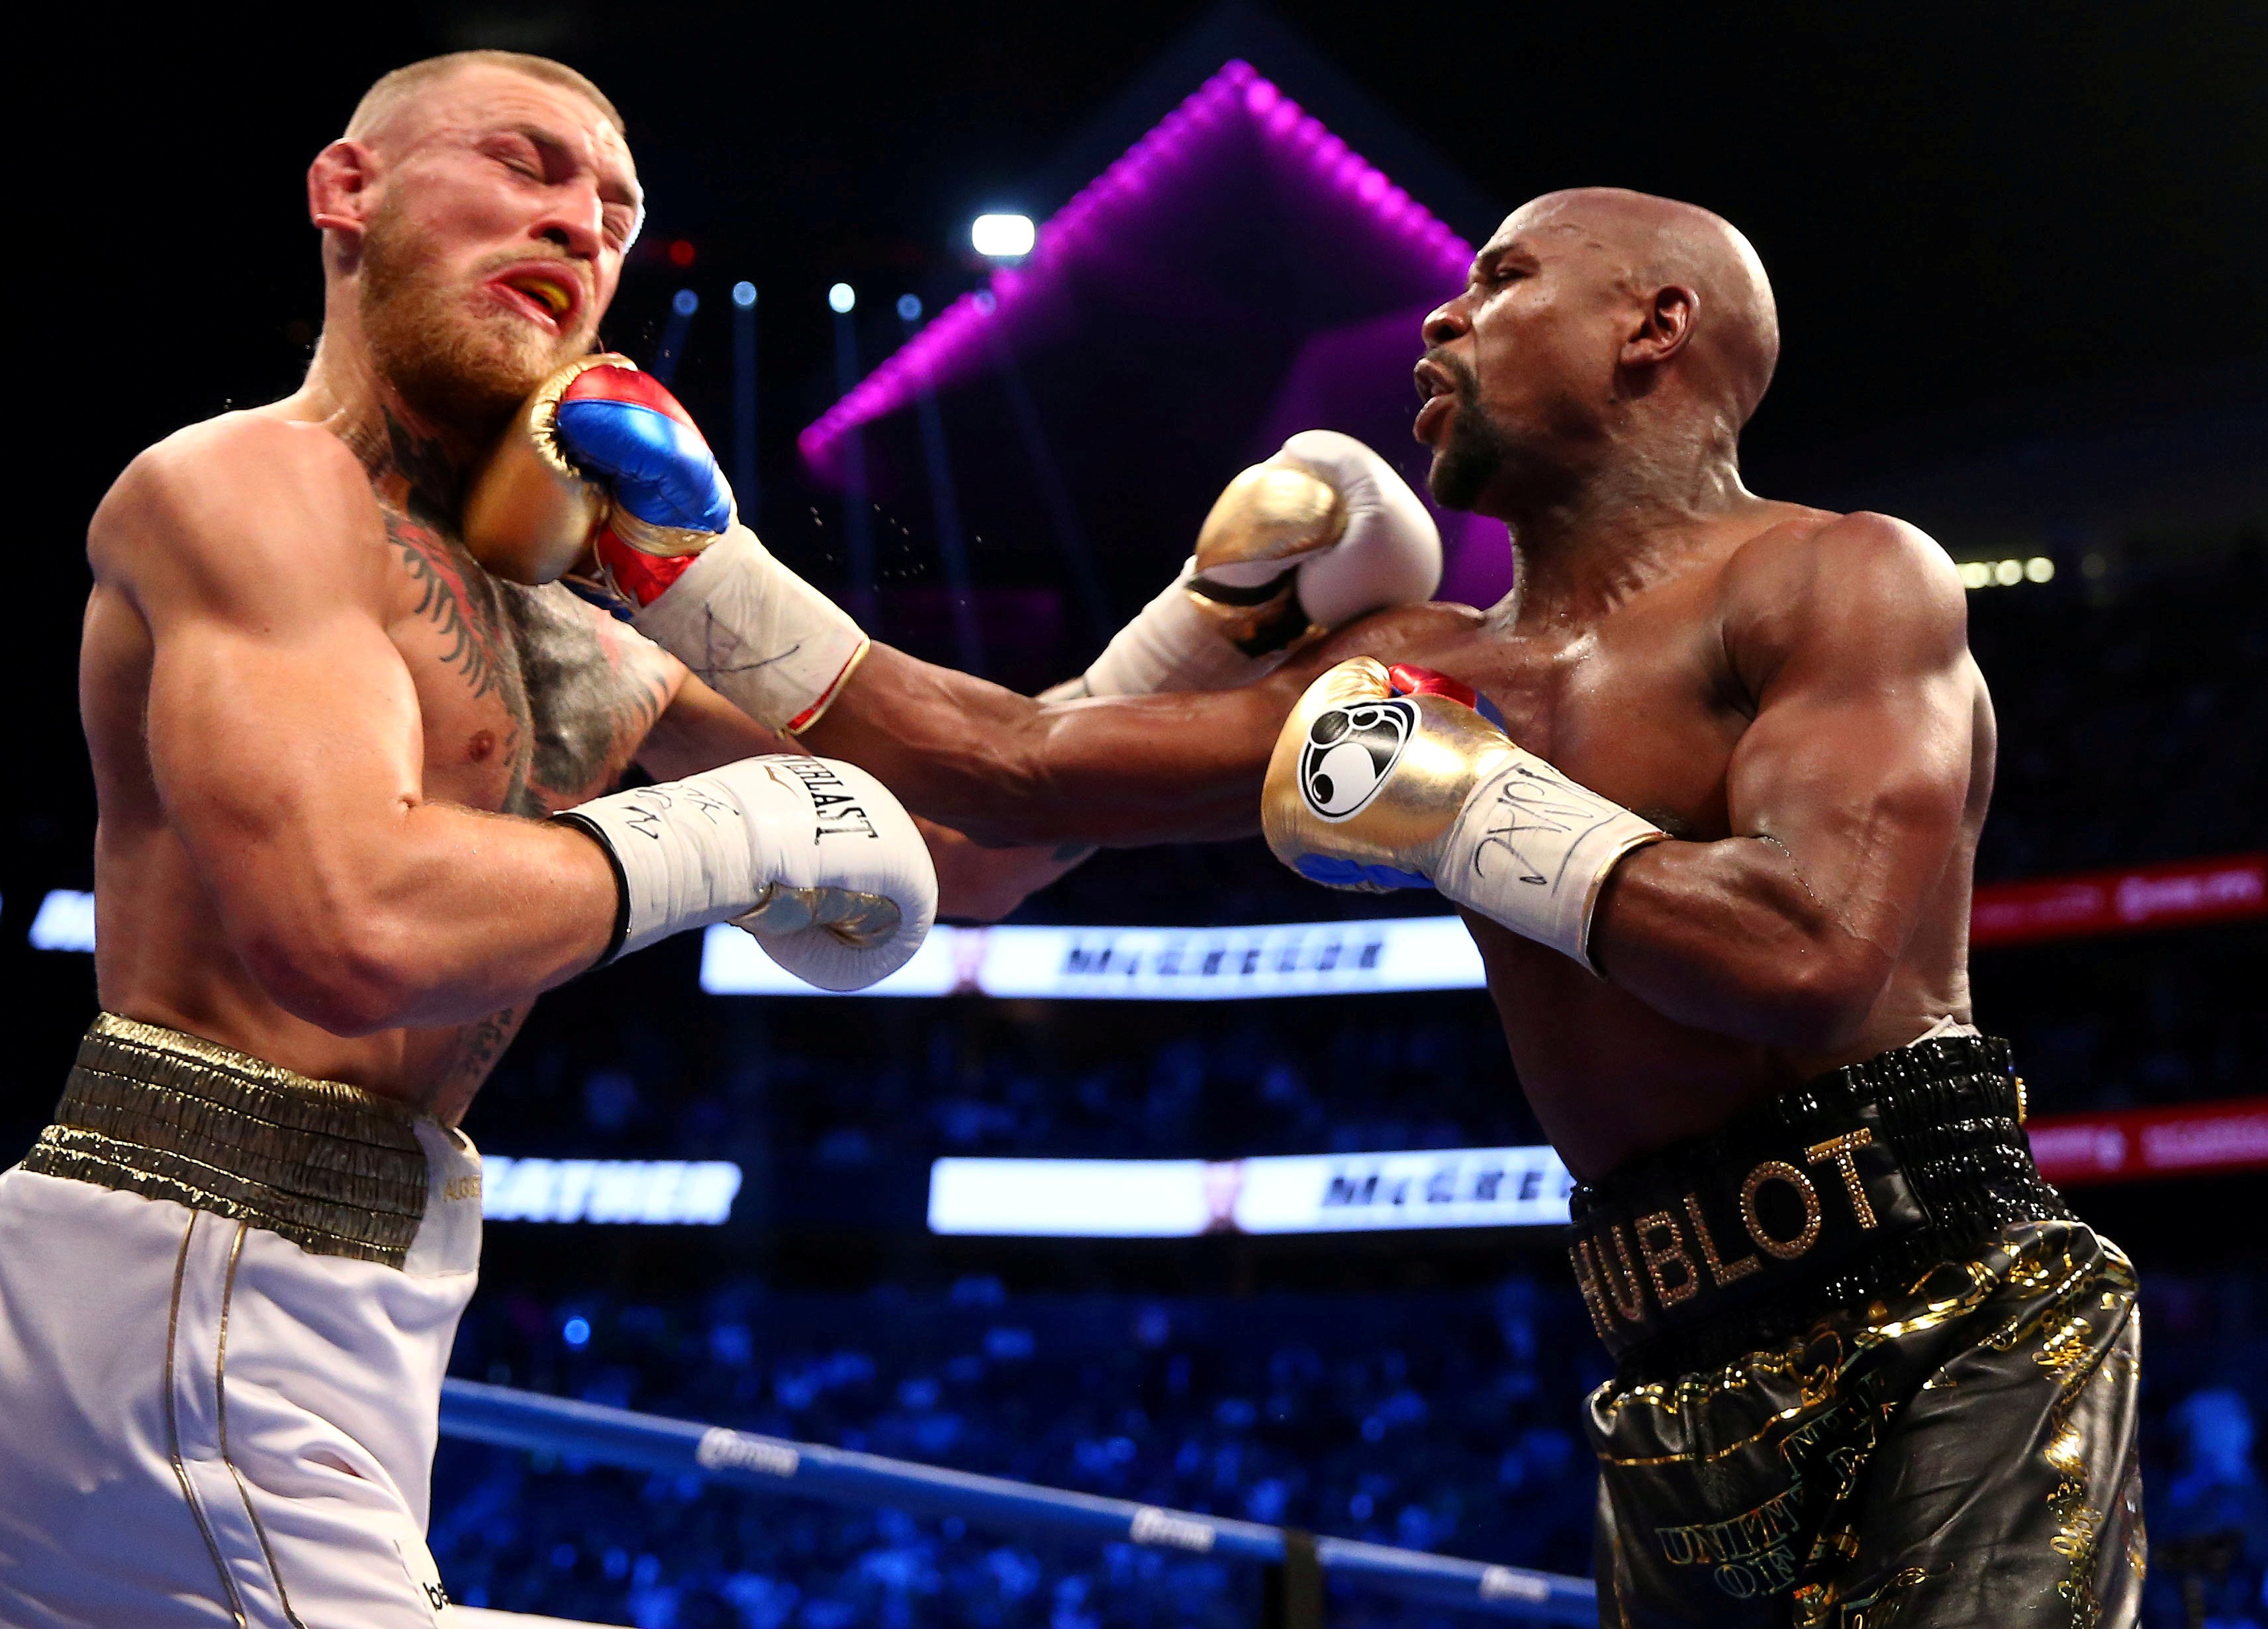 Floyd Mayweather Jnr (right) on his way to victory against Conor McGregor in their fight in Las Vegas in August. Photo: USA Today